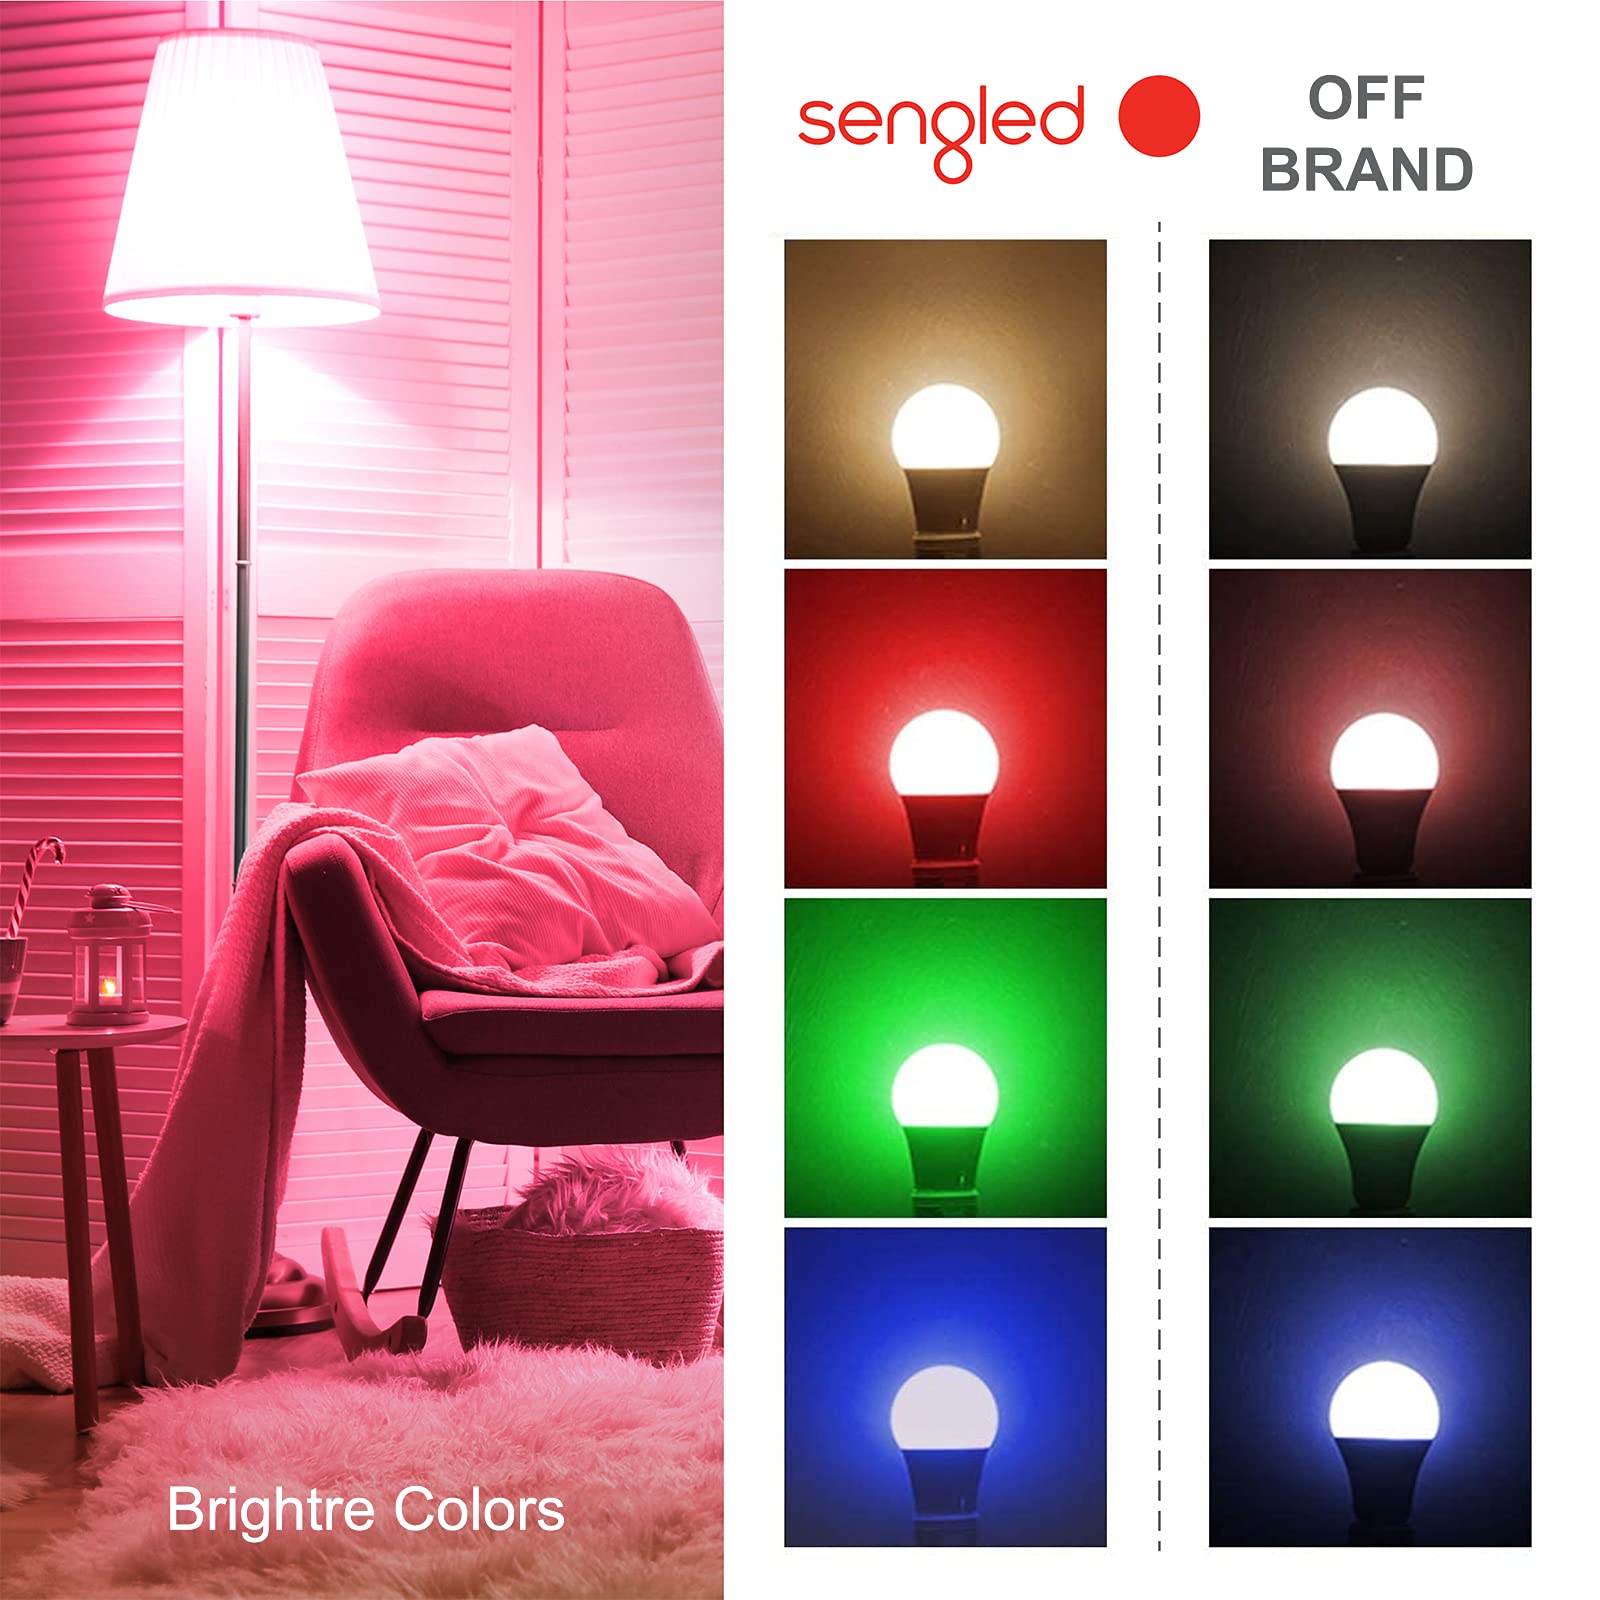 Sengled Smart Bulb, Color Changing Smart Bulbs Work with Alexa & Google Assistant, WiFi Light Bulbs No Hub Required A19 RGB Multicolor LED Light Bulb 60W Equivalent 800LM, 2 Pack